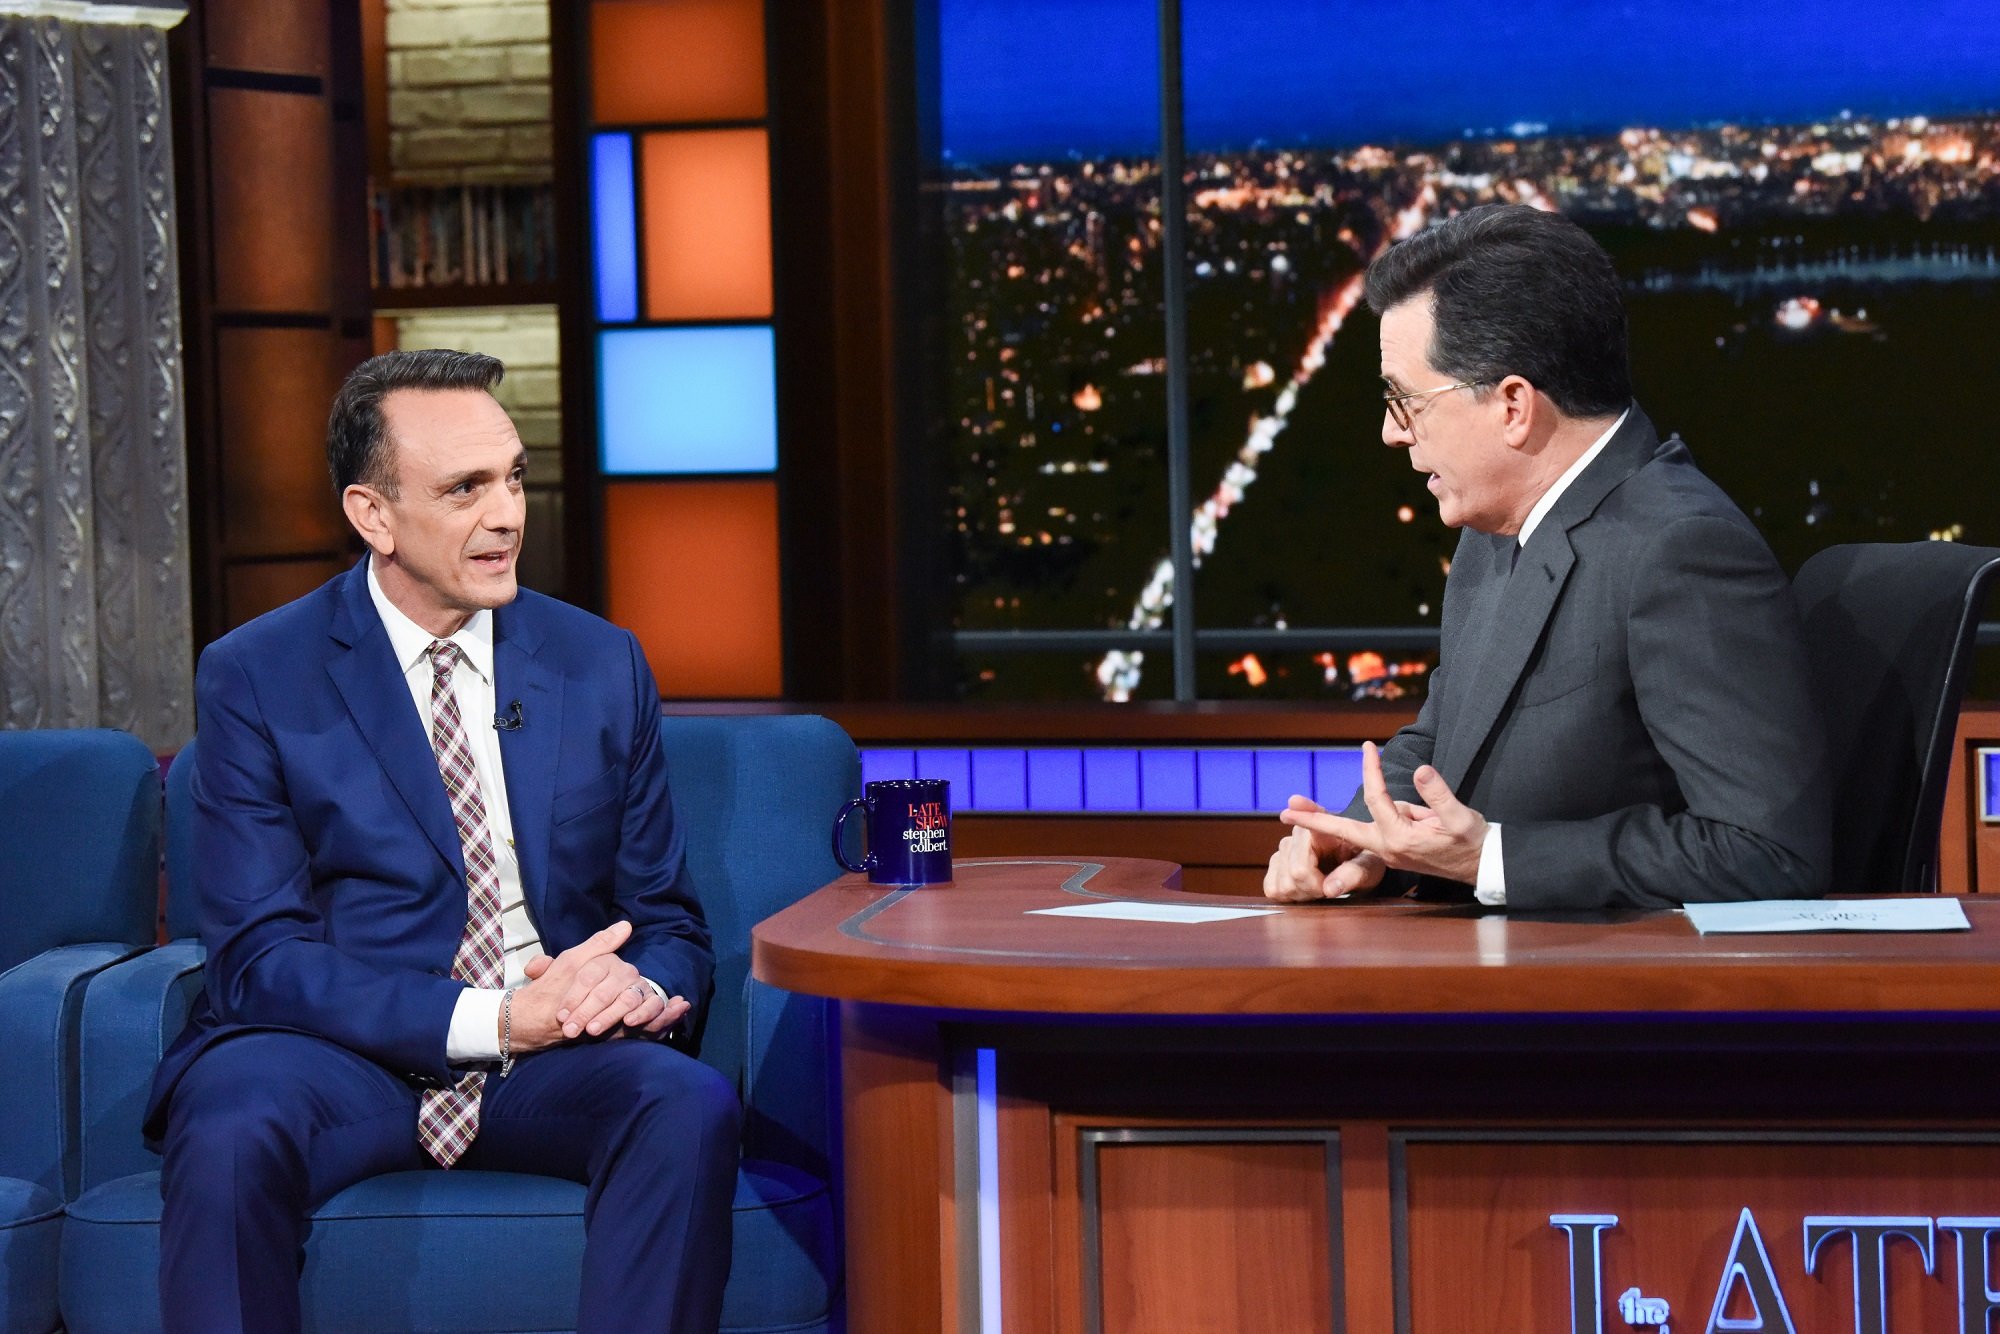 Hank Azaria tells Stephen Colbert he's willing to step aside from Apu